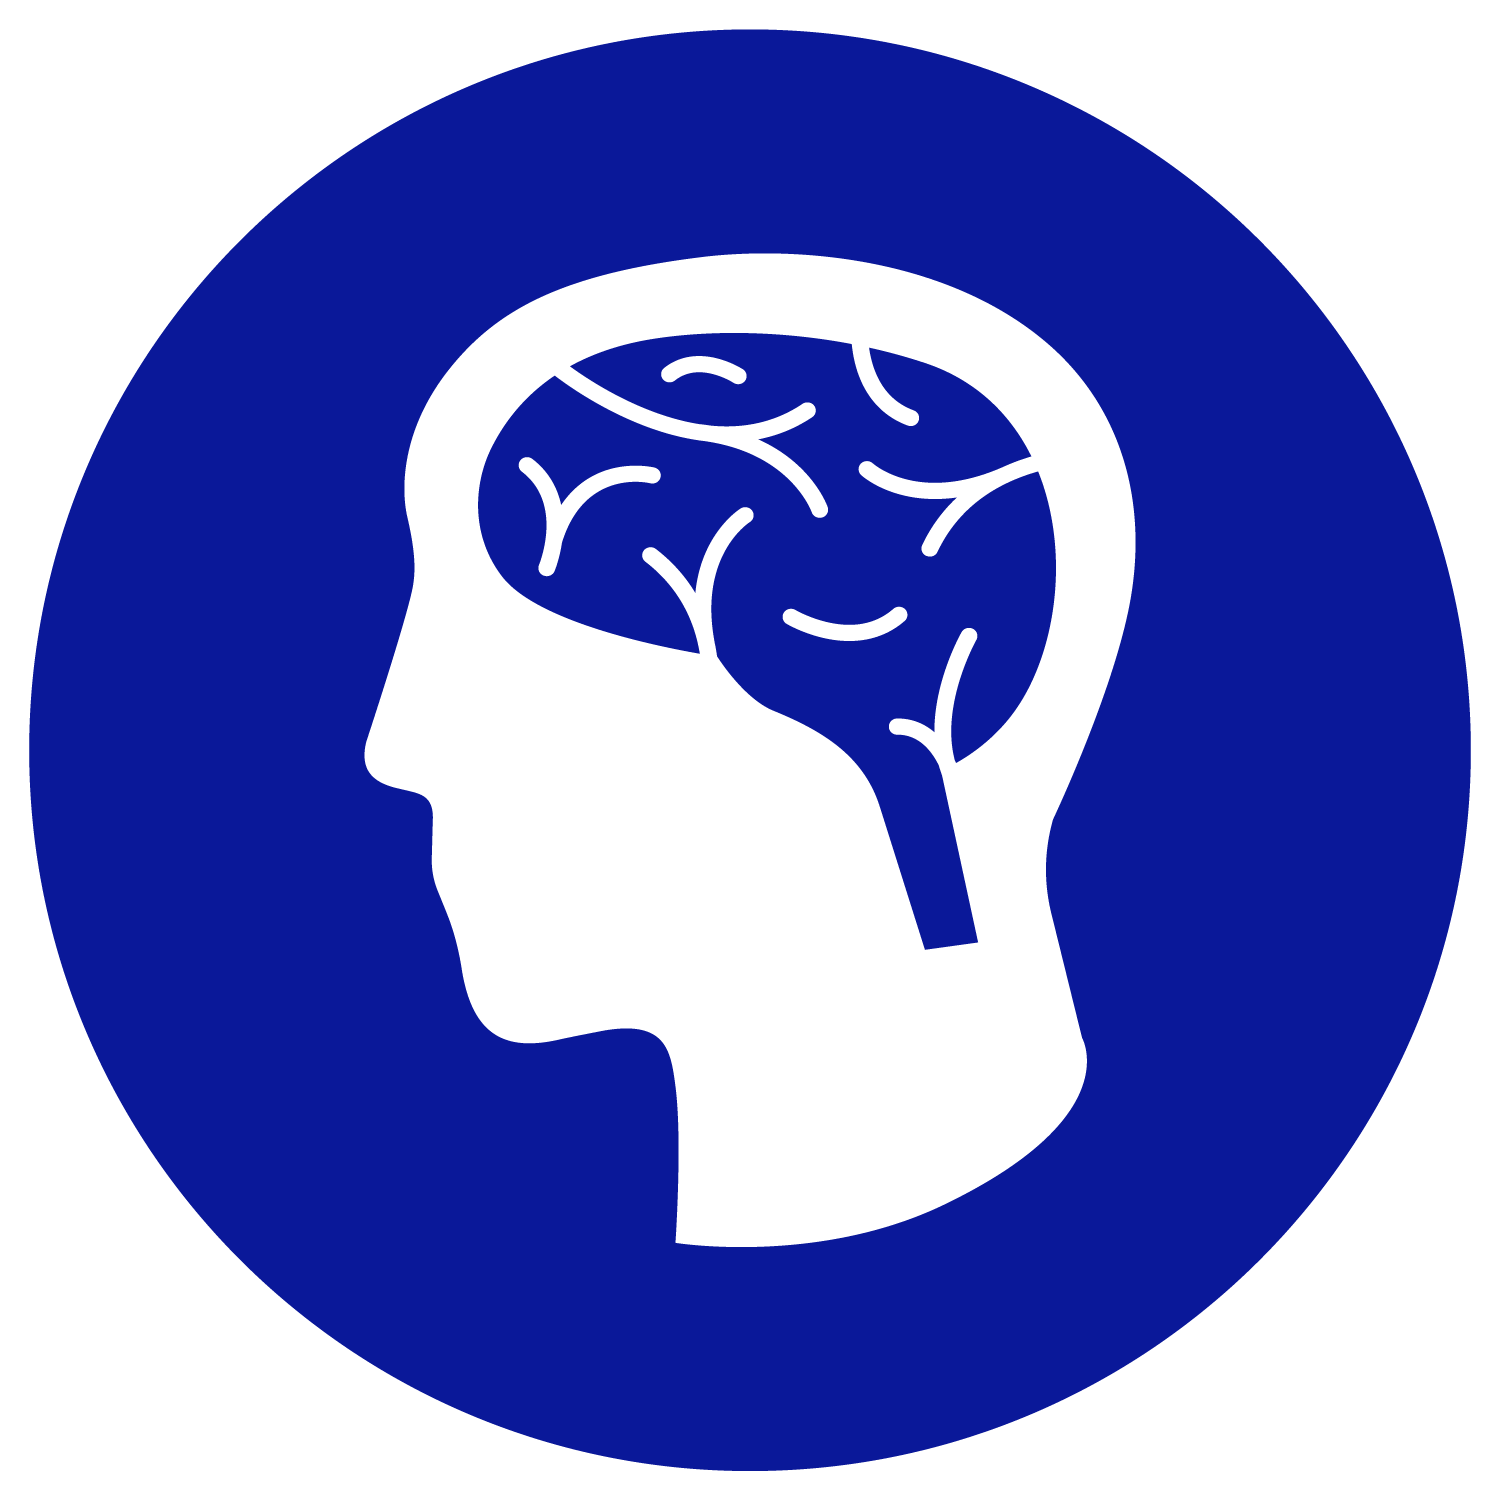 circular blue icon with a white, side-view silhouette of a head and neck with a blue brain shape inside